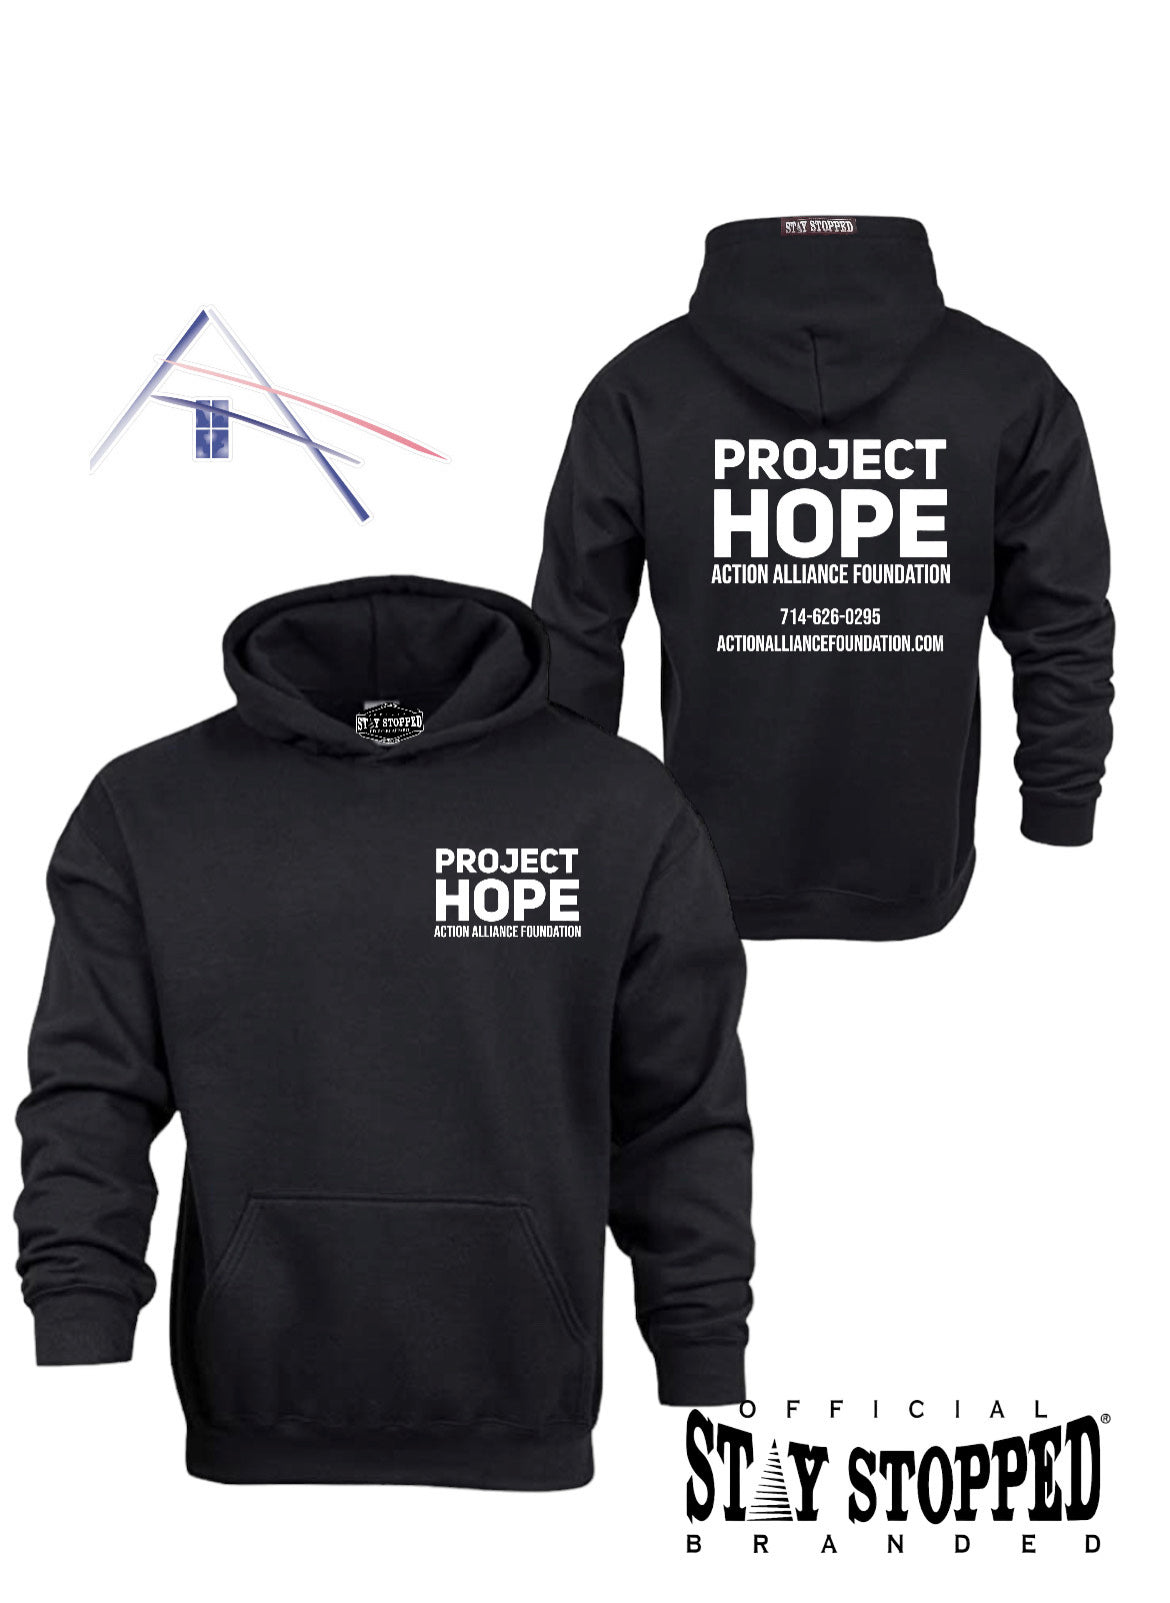 PROJECT HOPE-Pull Over Hoodies BLACK